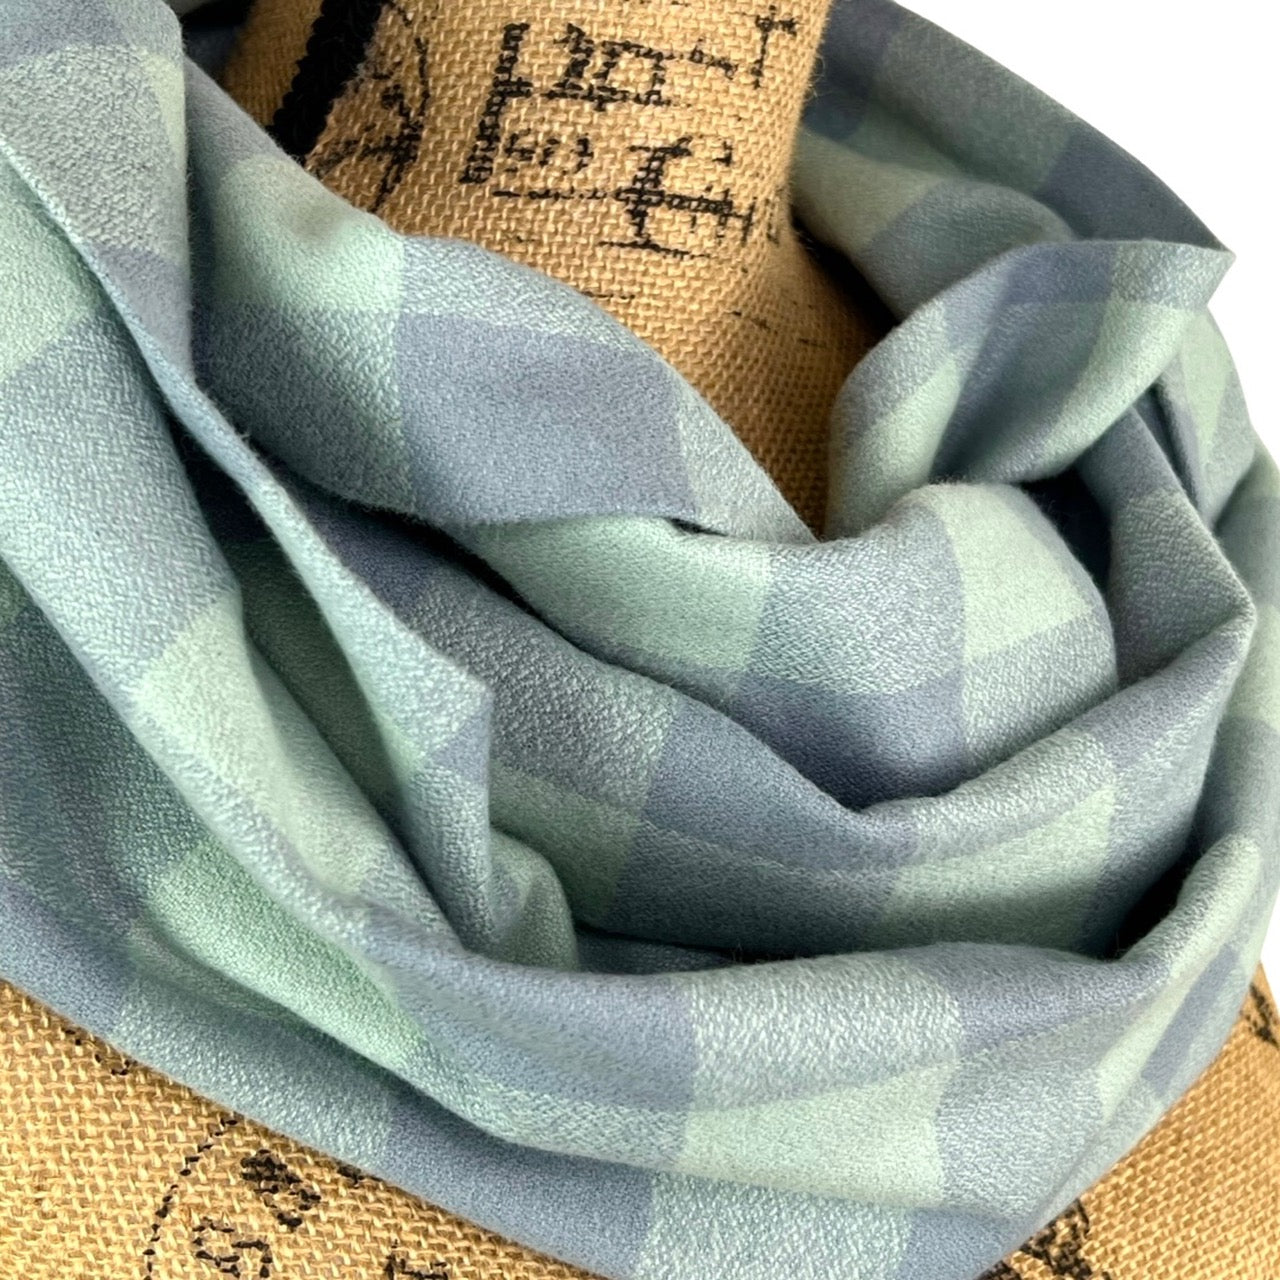 100% Organic Cotton Buffalo Plaid in Mint Green and Periwinkle Grey Infinity and Blanket Scarves